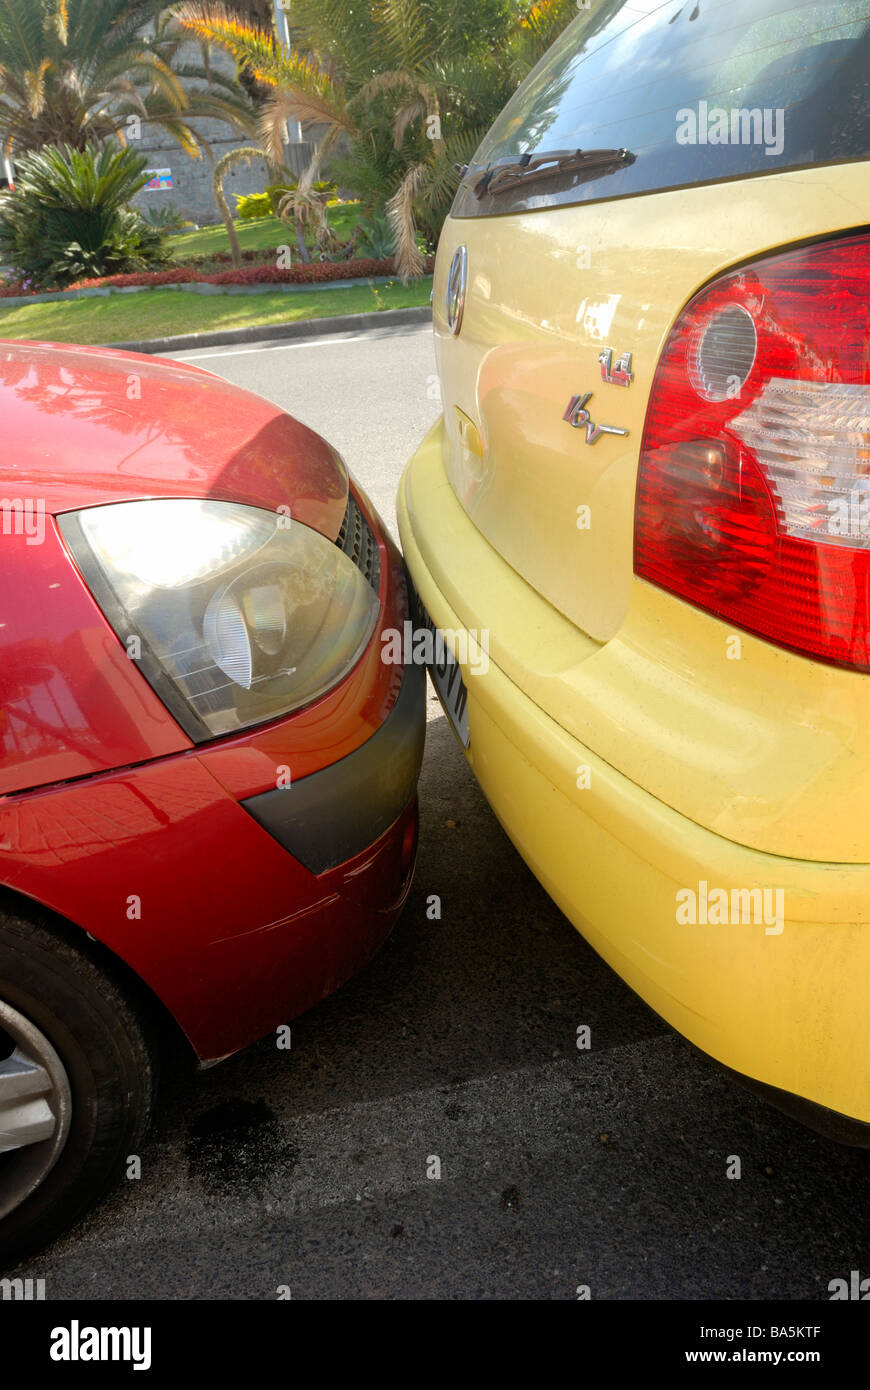 A typical Spanish road side touch parking. Puerto Rico, Gran Canaria, Canary Islands, Spain, Europe. Stock Photo